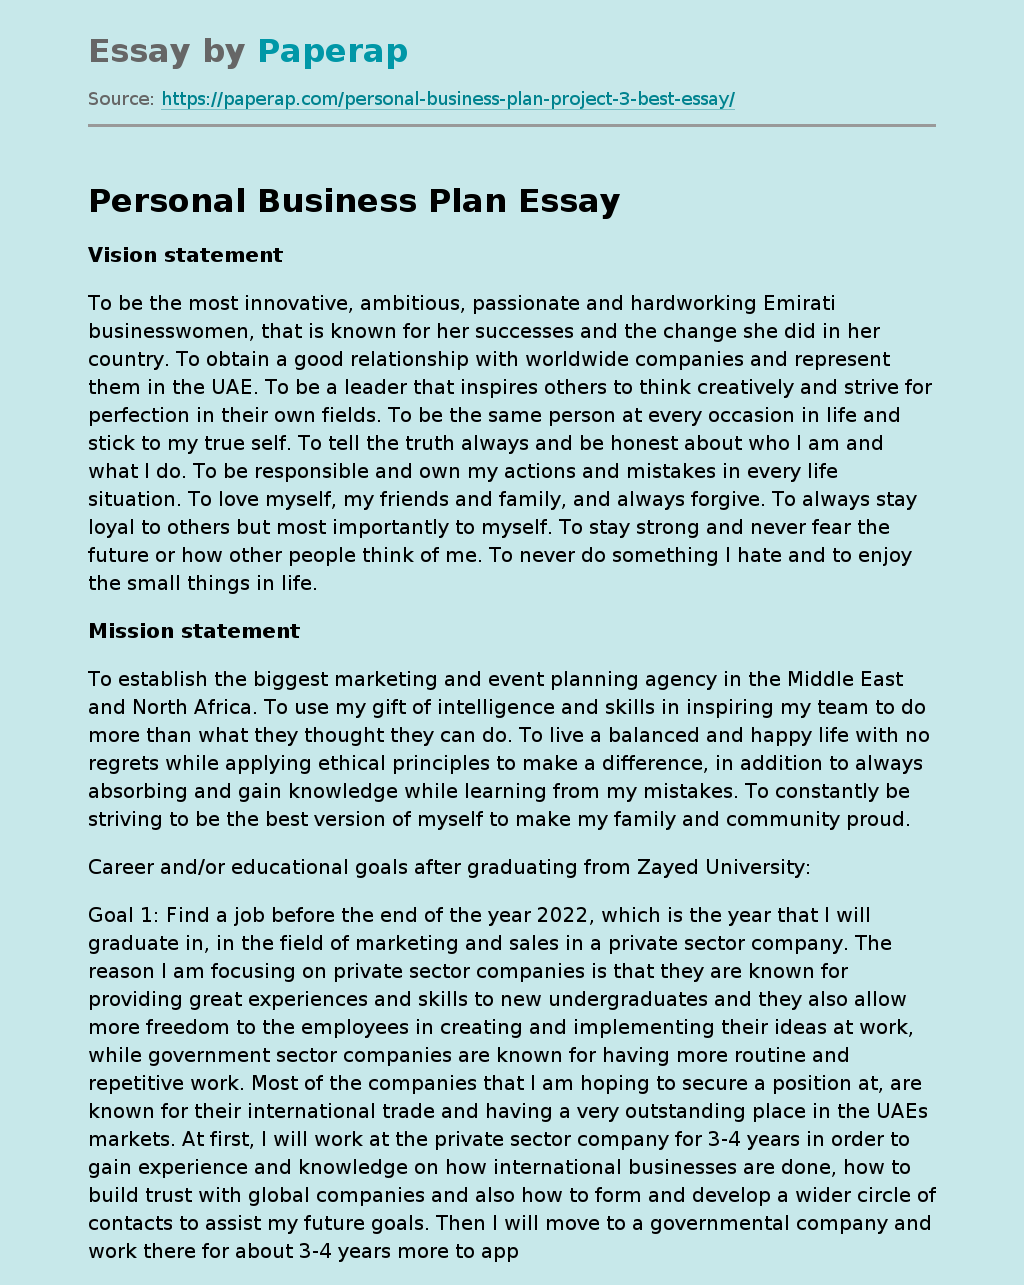 Personal Business Plan